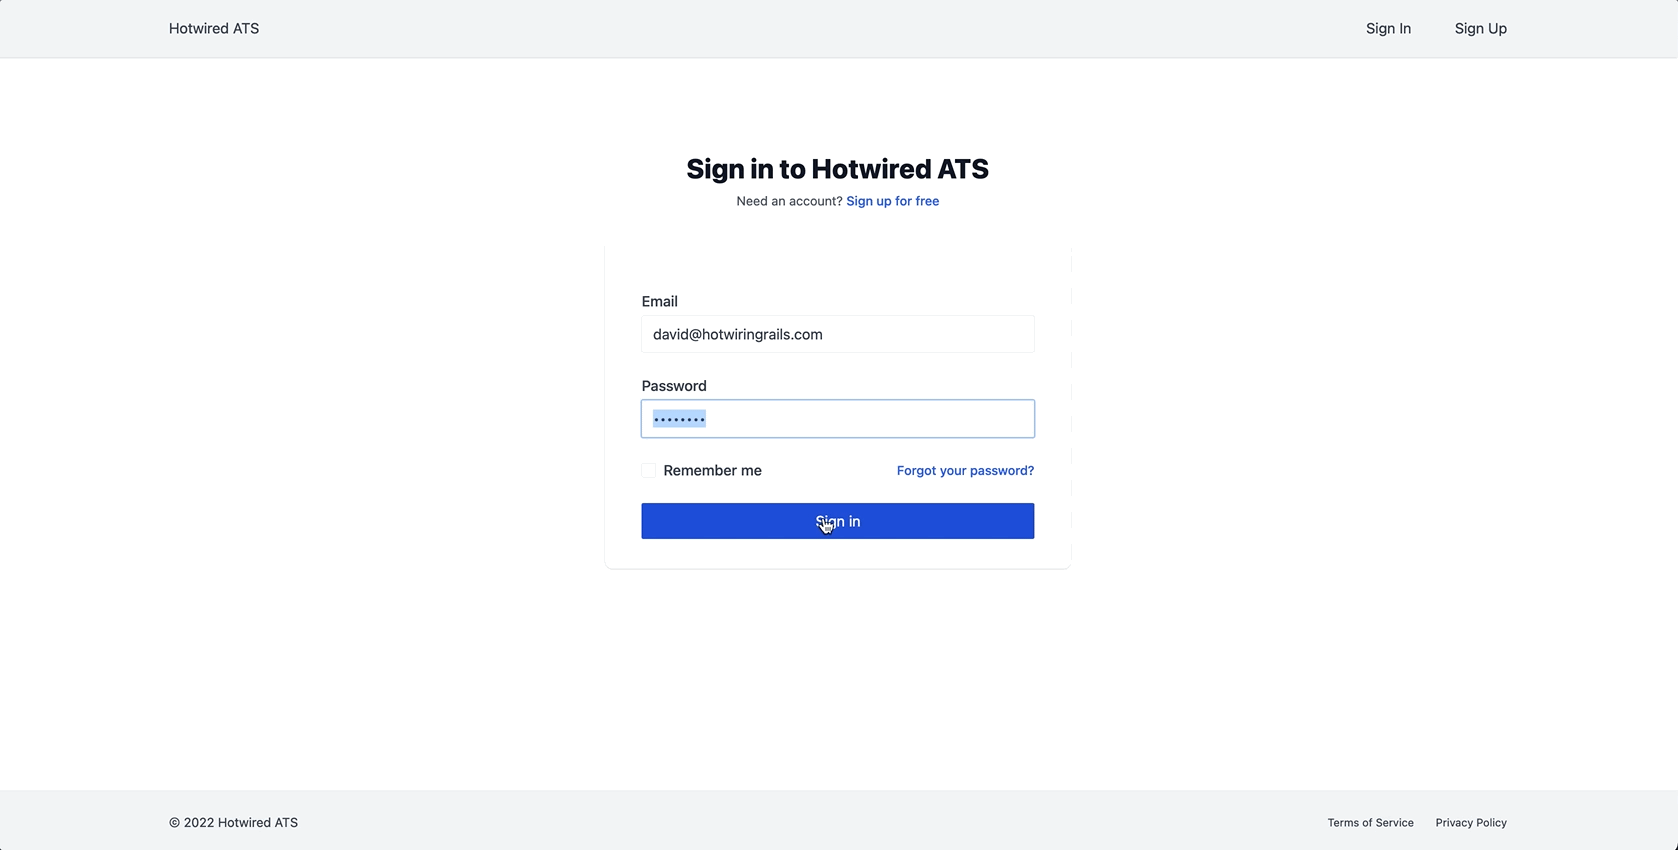 A gif of a user signing to Hotwired ATS and then clicking a link to sign back out. When the sign out, a navigation bar at the top of the screen updates its options.